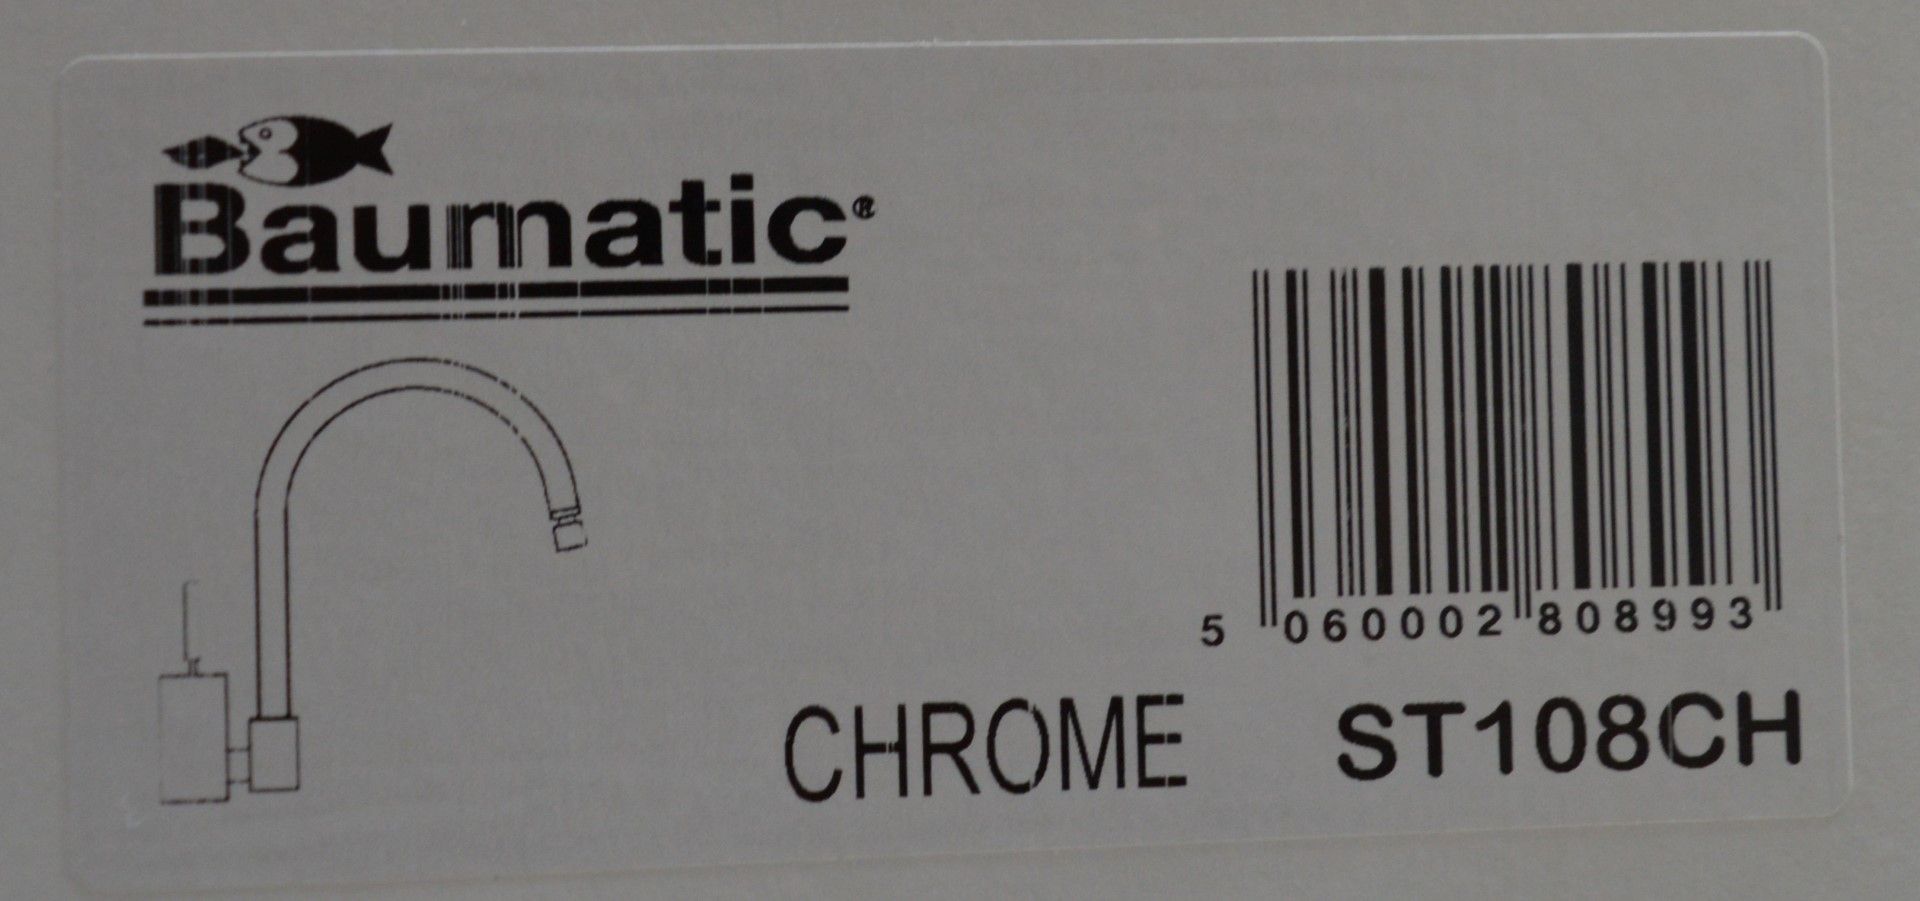 1 x Baumatic ST108CH Avalon Mixer Tap in Chrome – NEW & BOXED – CL053 – Location: Altrincham - Image 4 of 6